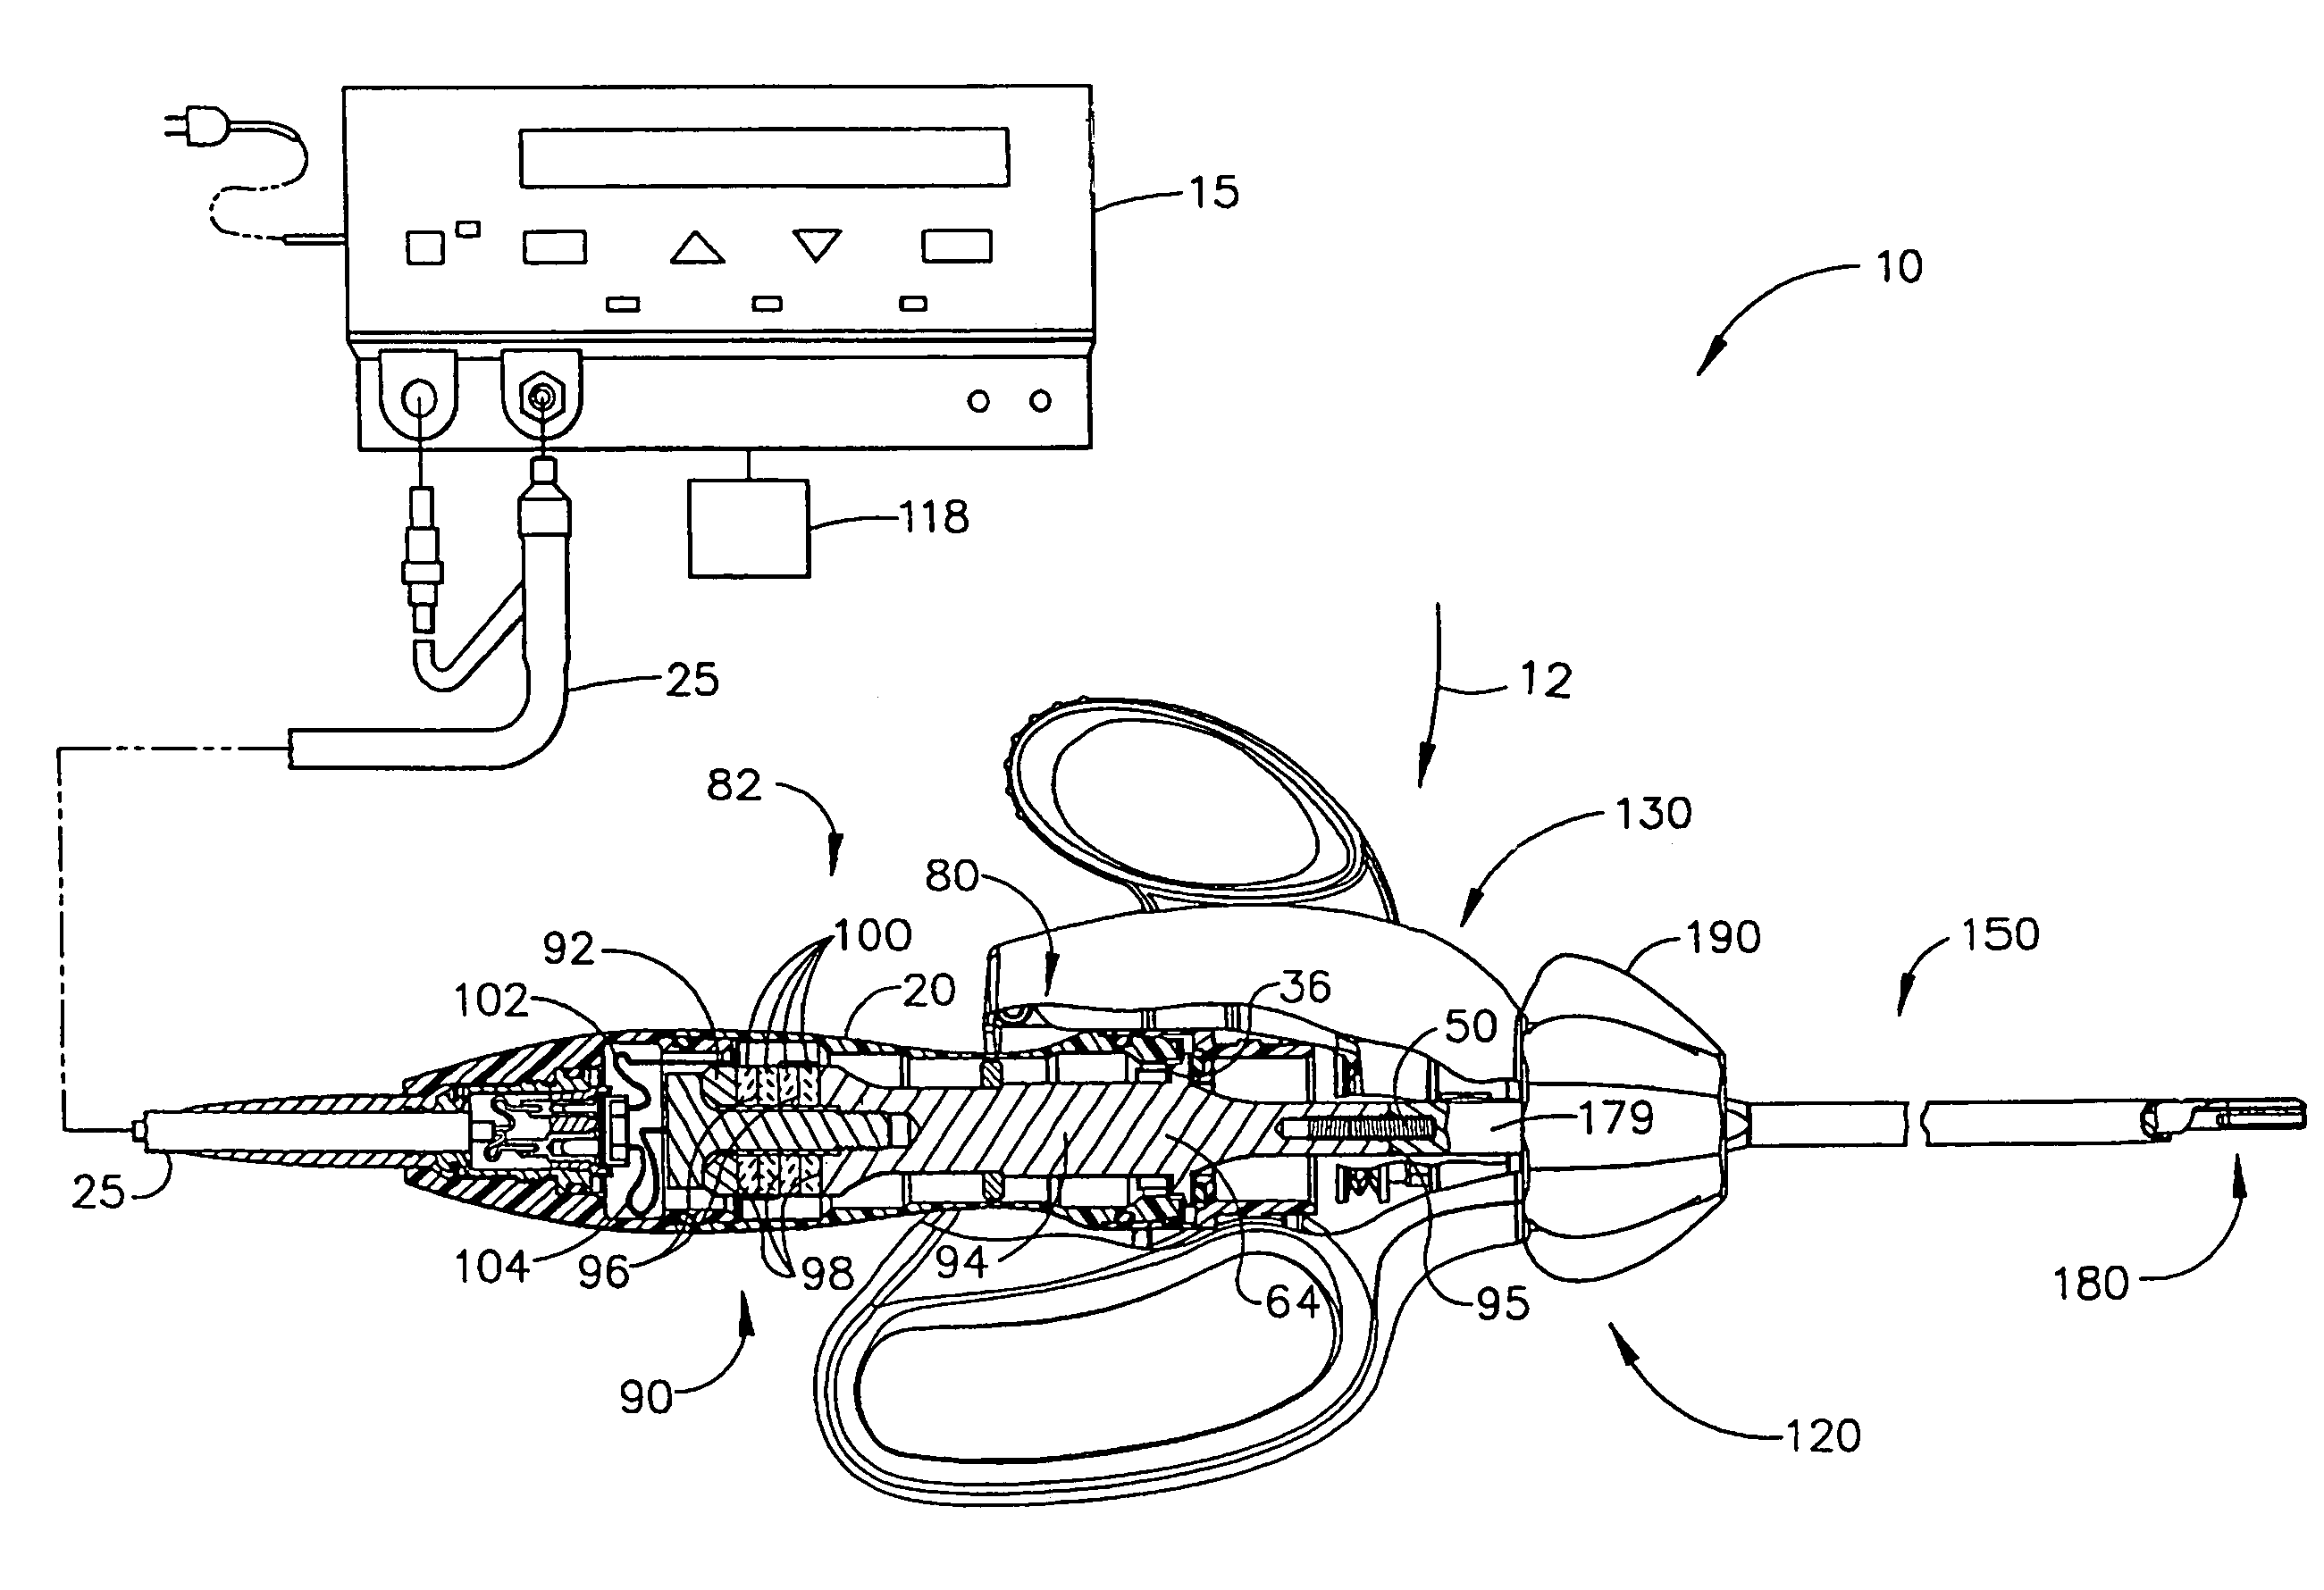 System for controlling ultrasonic clamping and cutting instruments